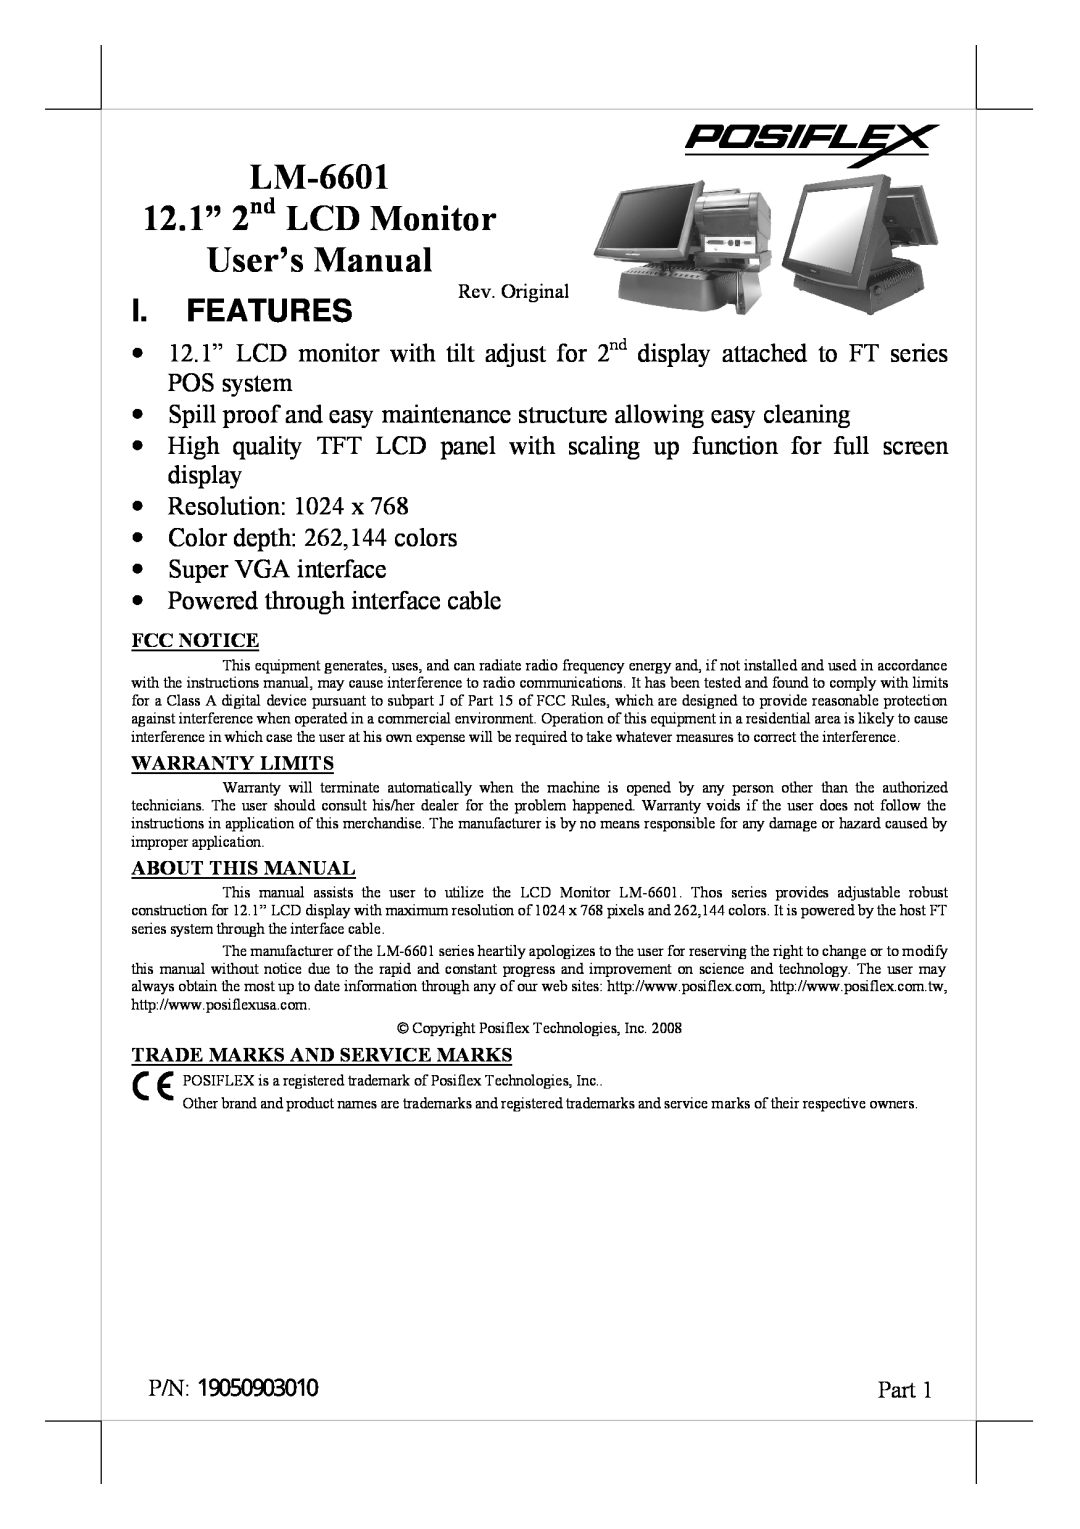 POSIFLEX Business Machines user manual I.Features, LM-6601 12.1” 2nd LCD Monitor User’s Manual, P/N 趫韘顒韙鞥醥, Part 